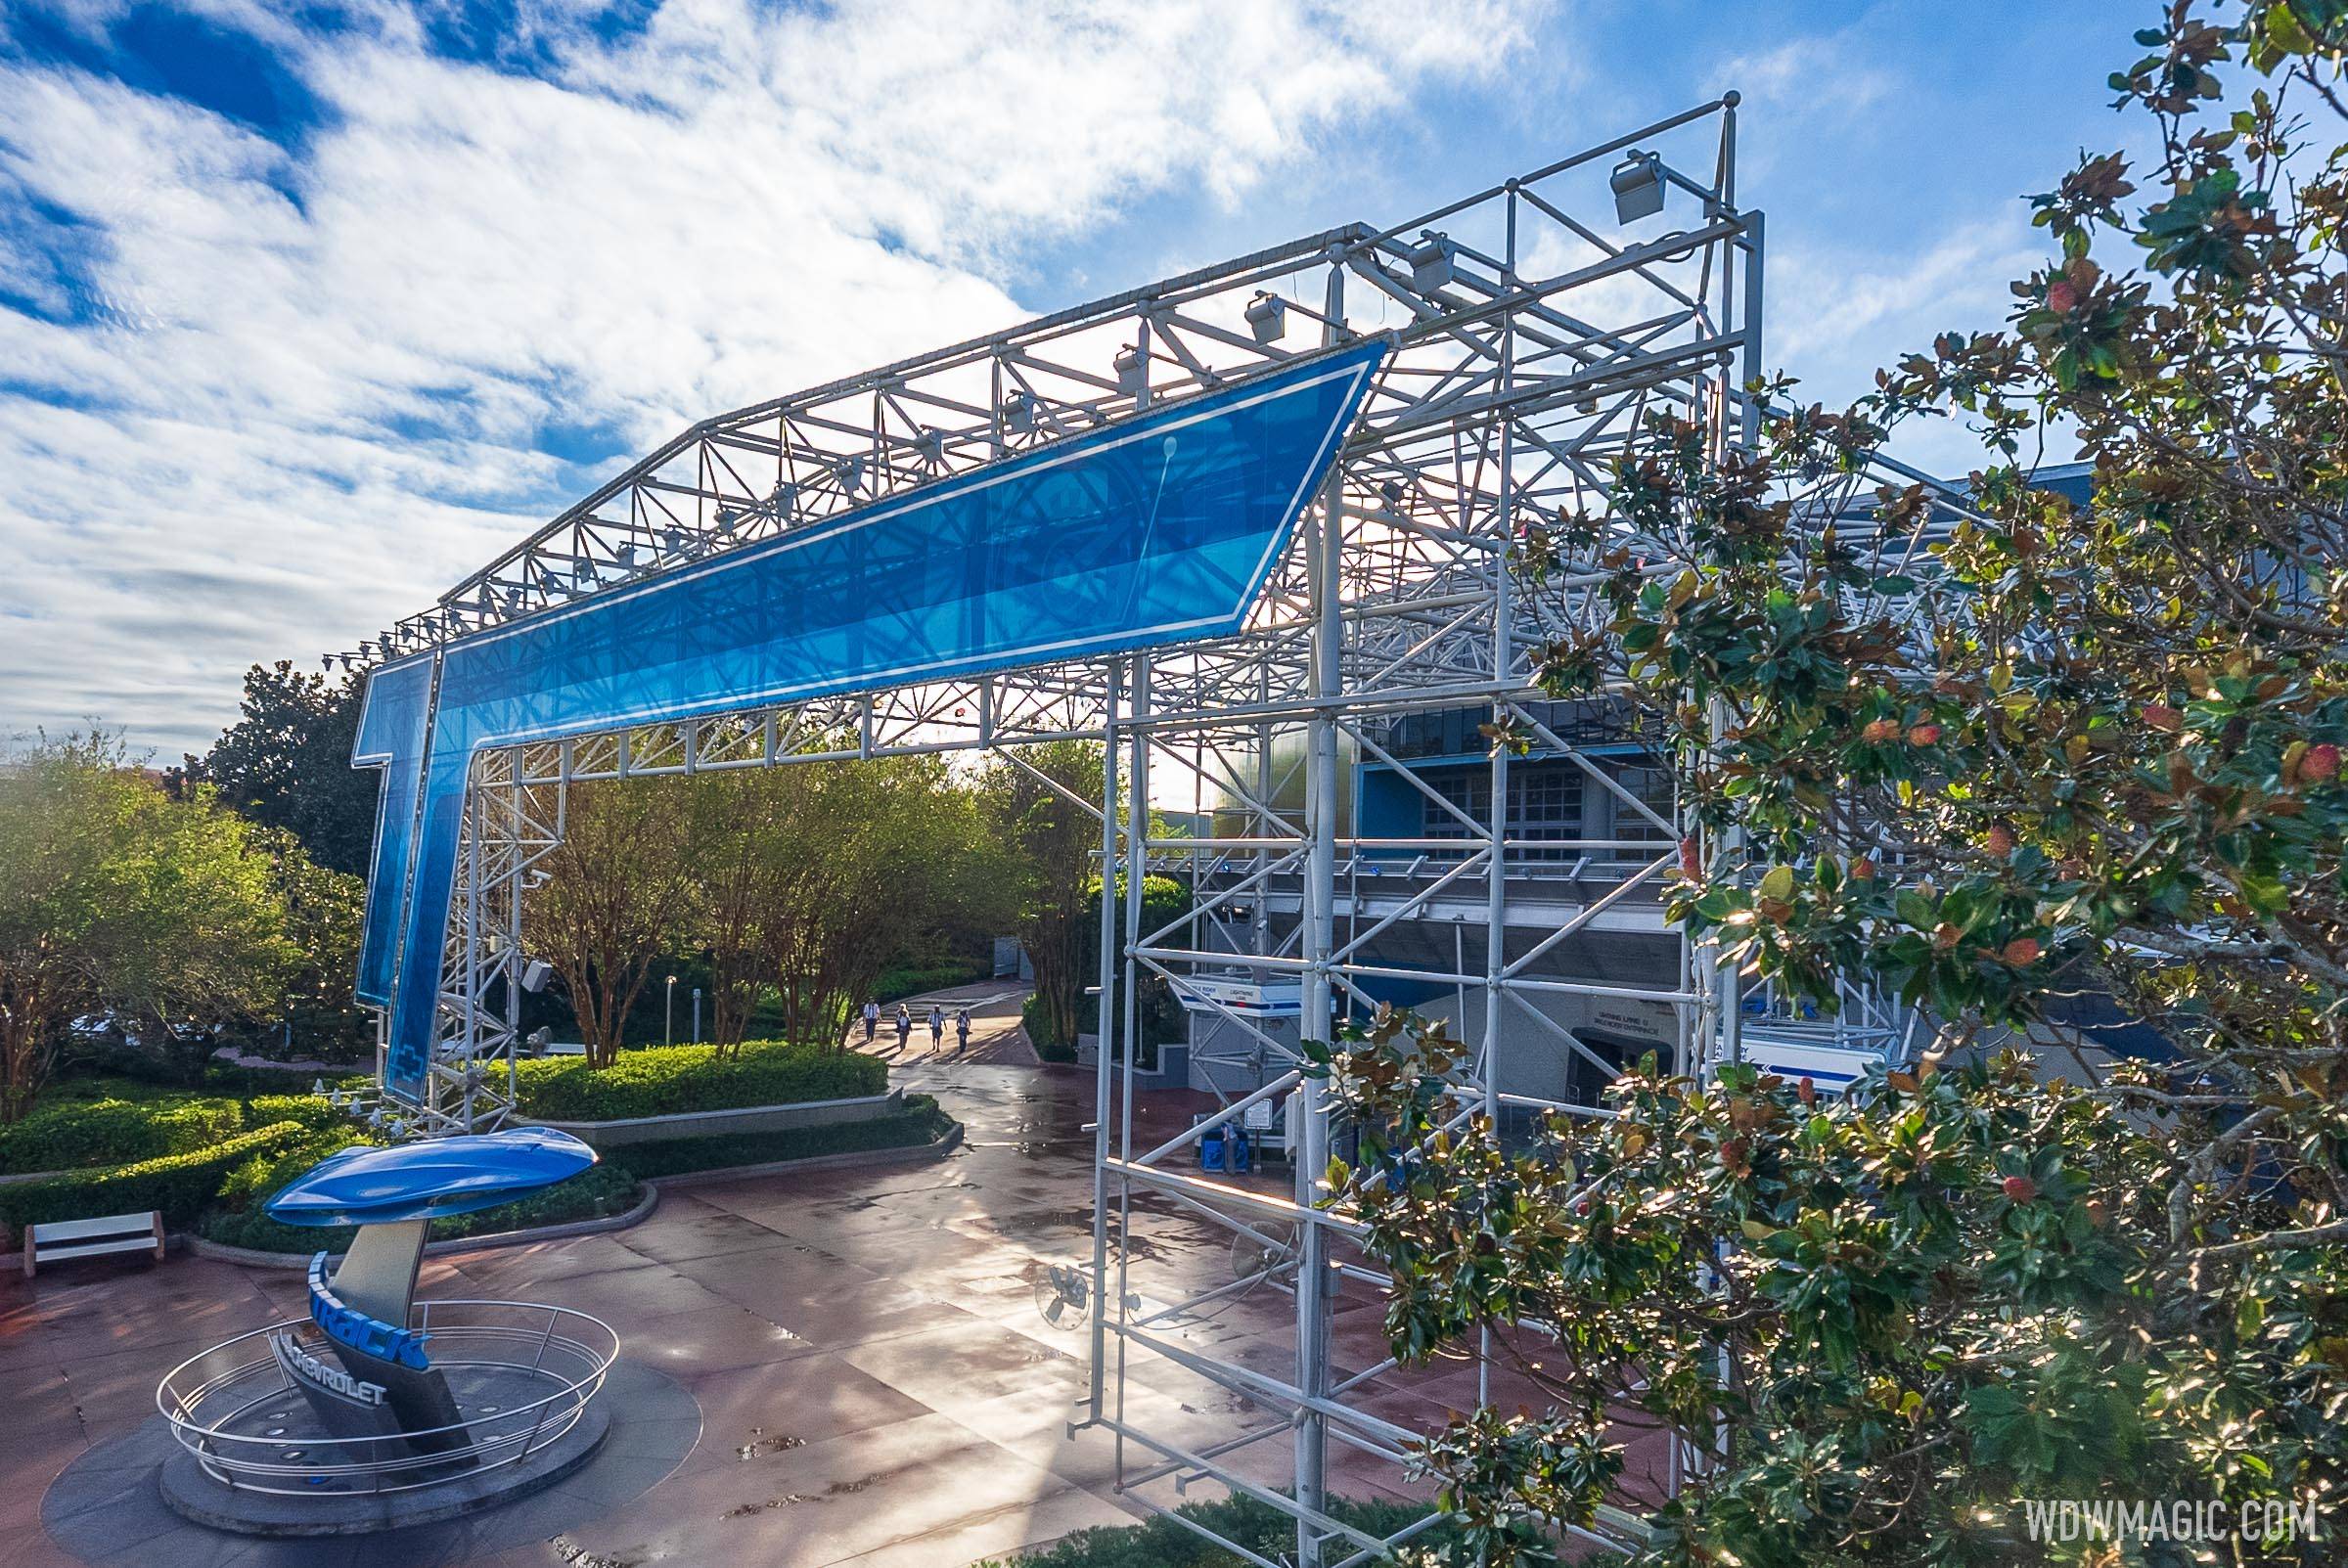 Test Track canopy damage from Hurricane Ian